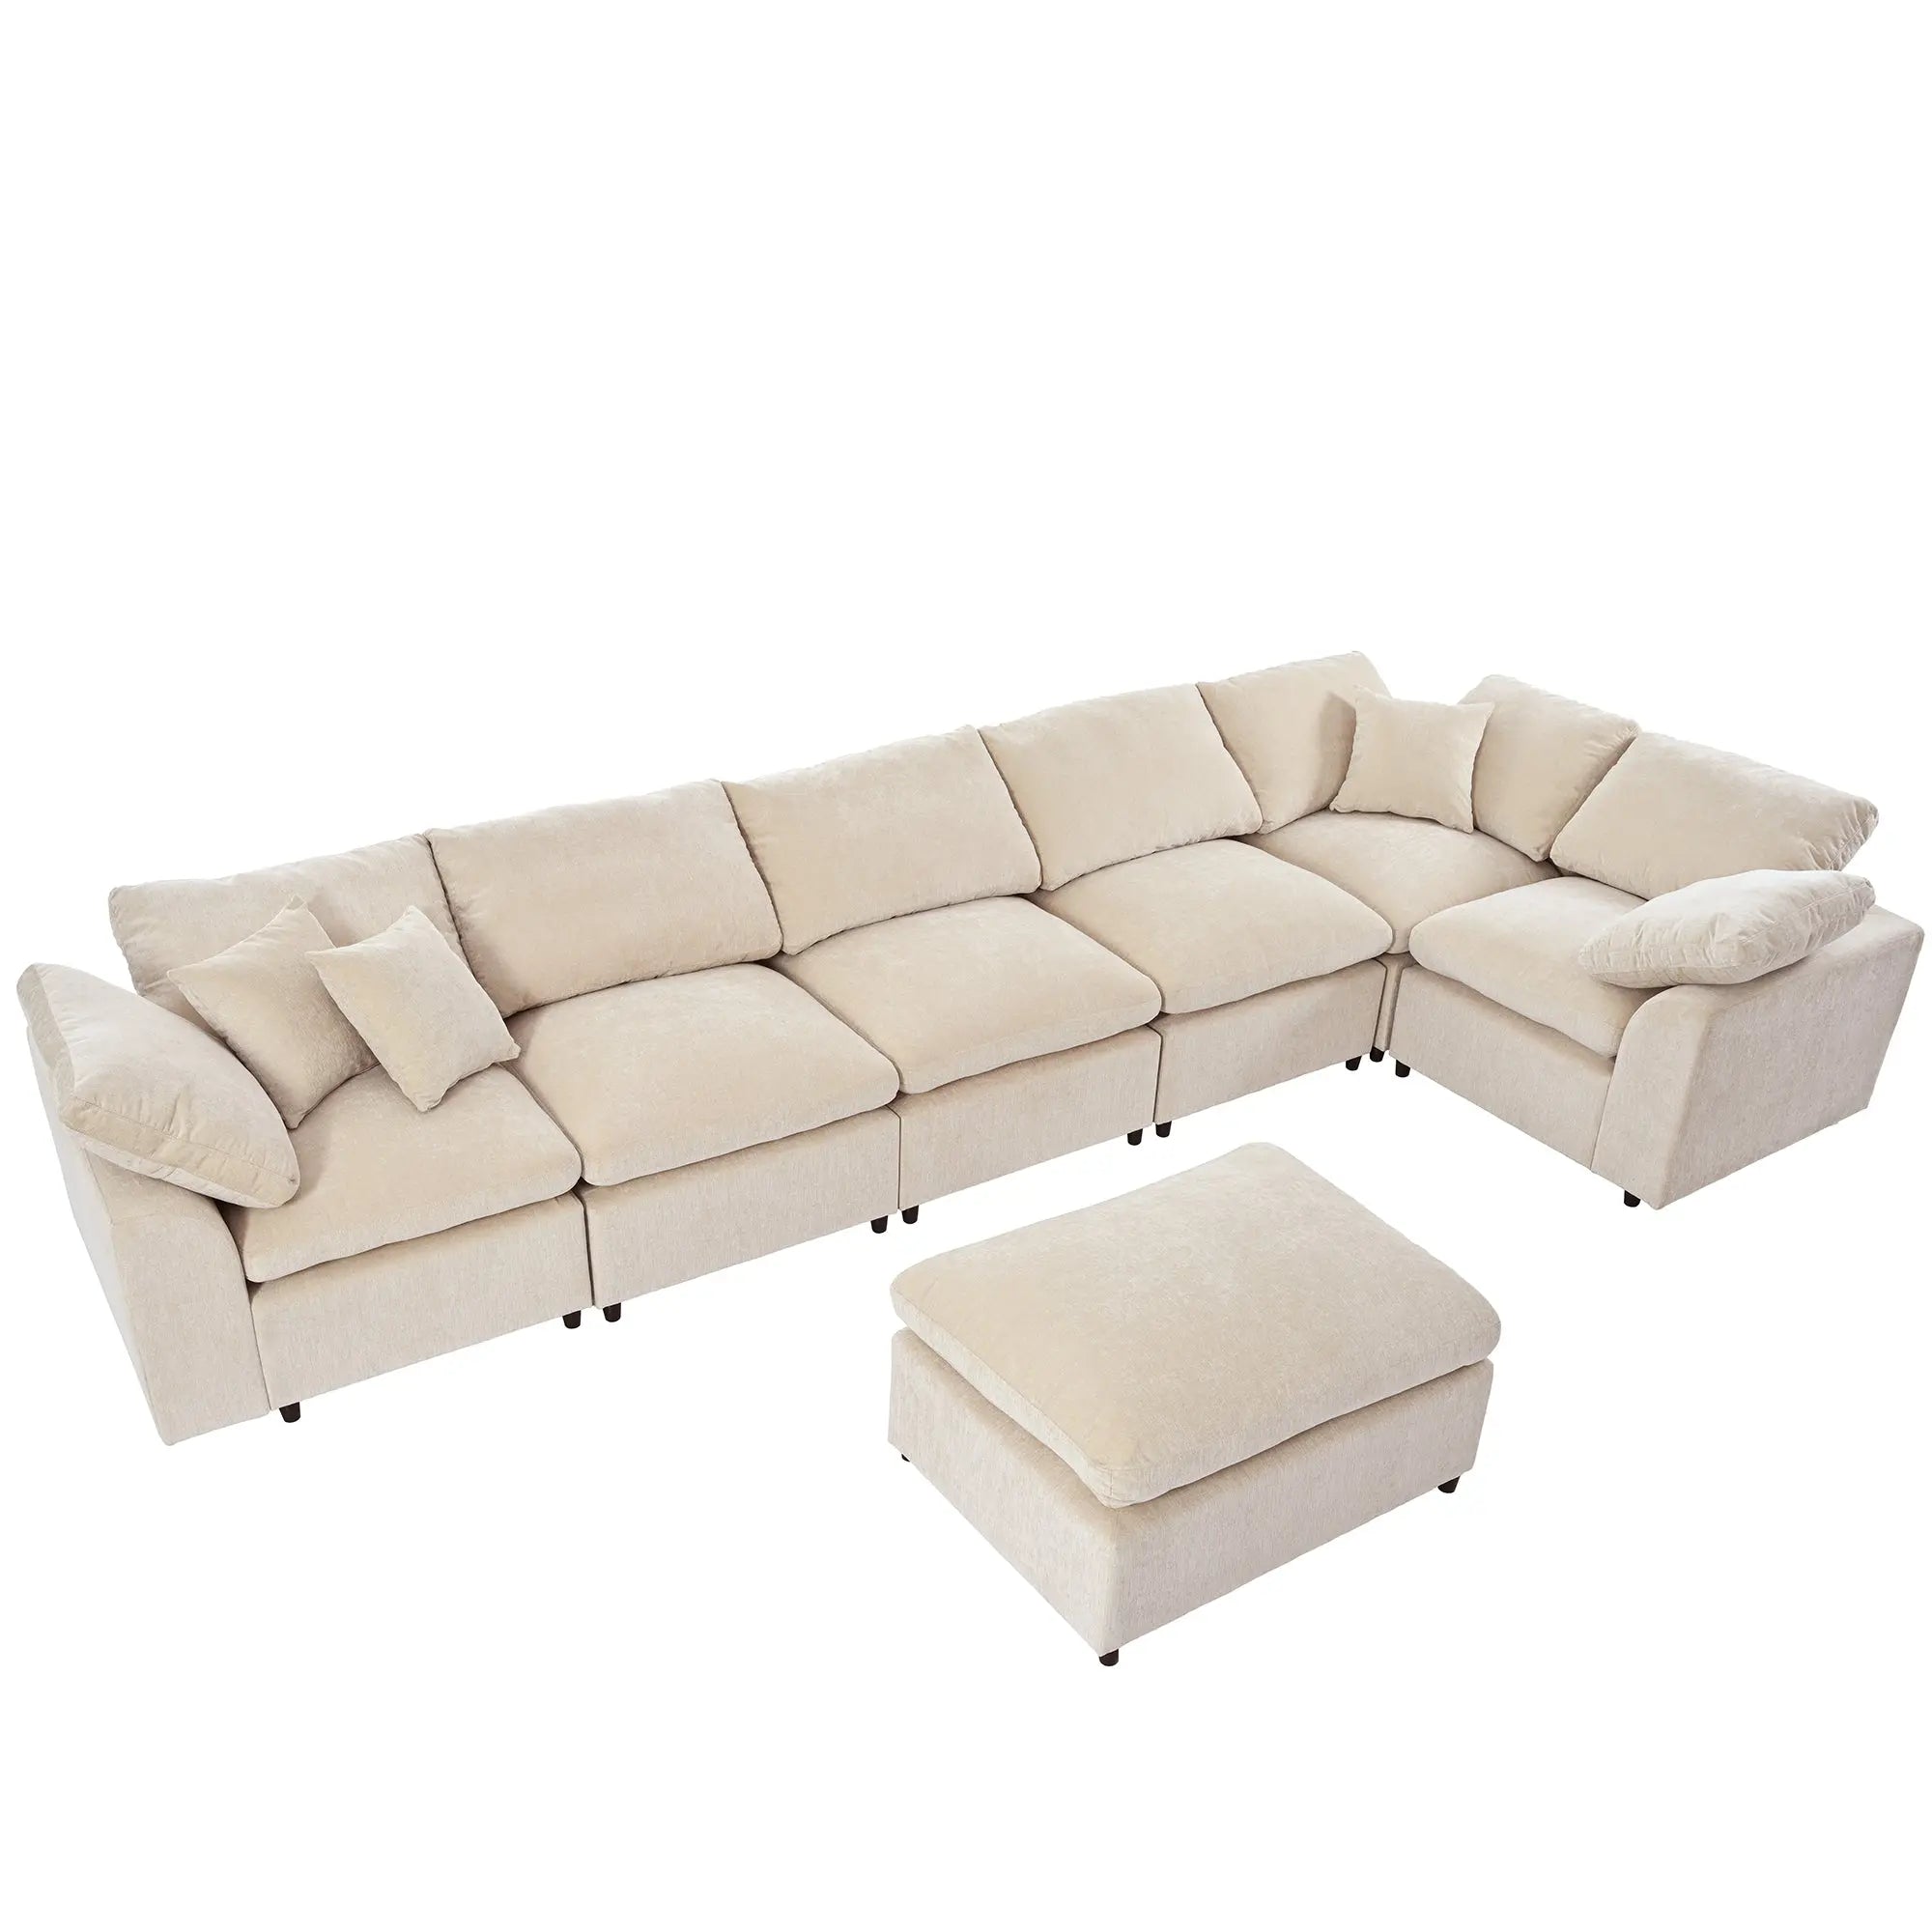 Bellemave 129.3" Oversized Modular Sectional Sofa with Ottoman L Shaped Corner Sectional Bellemave